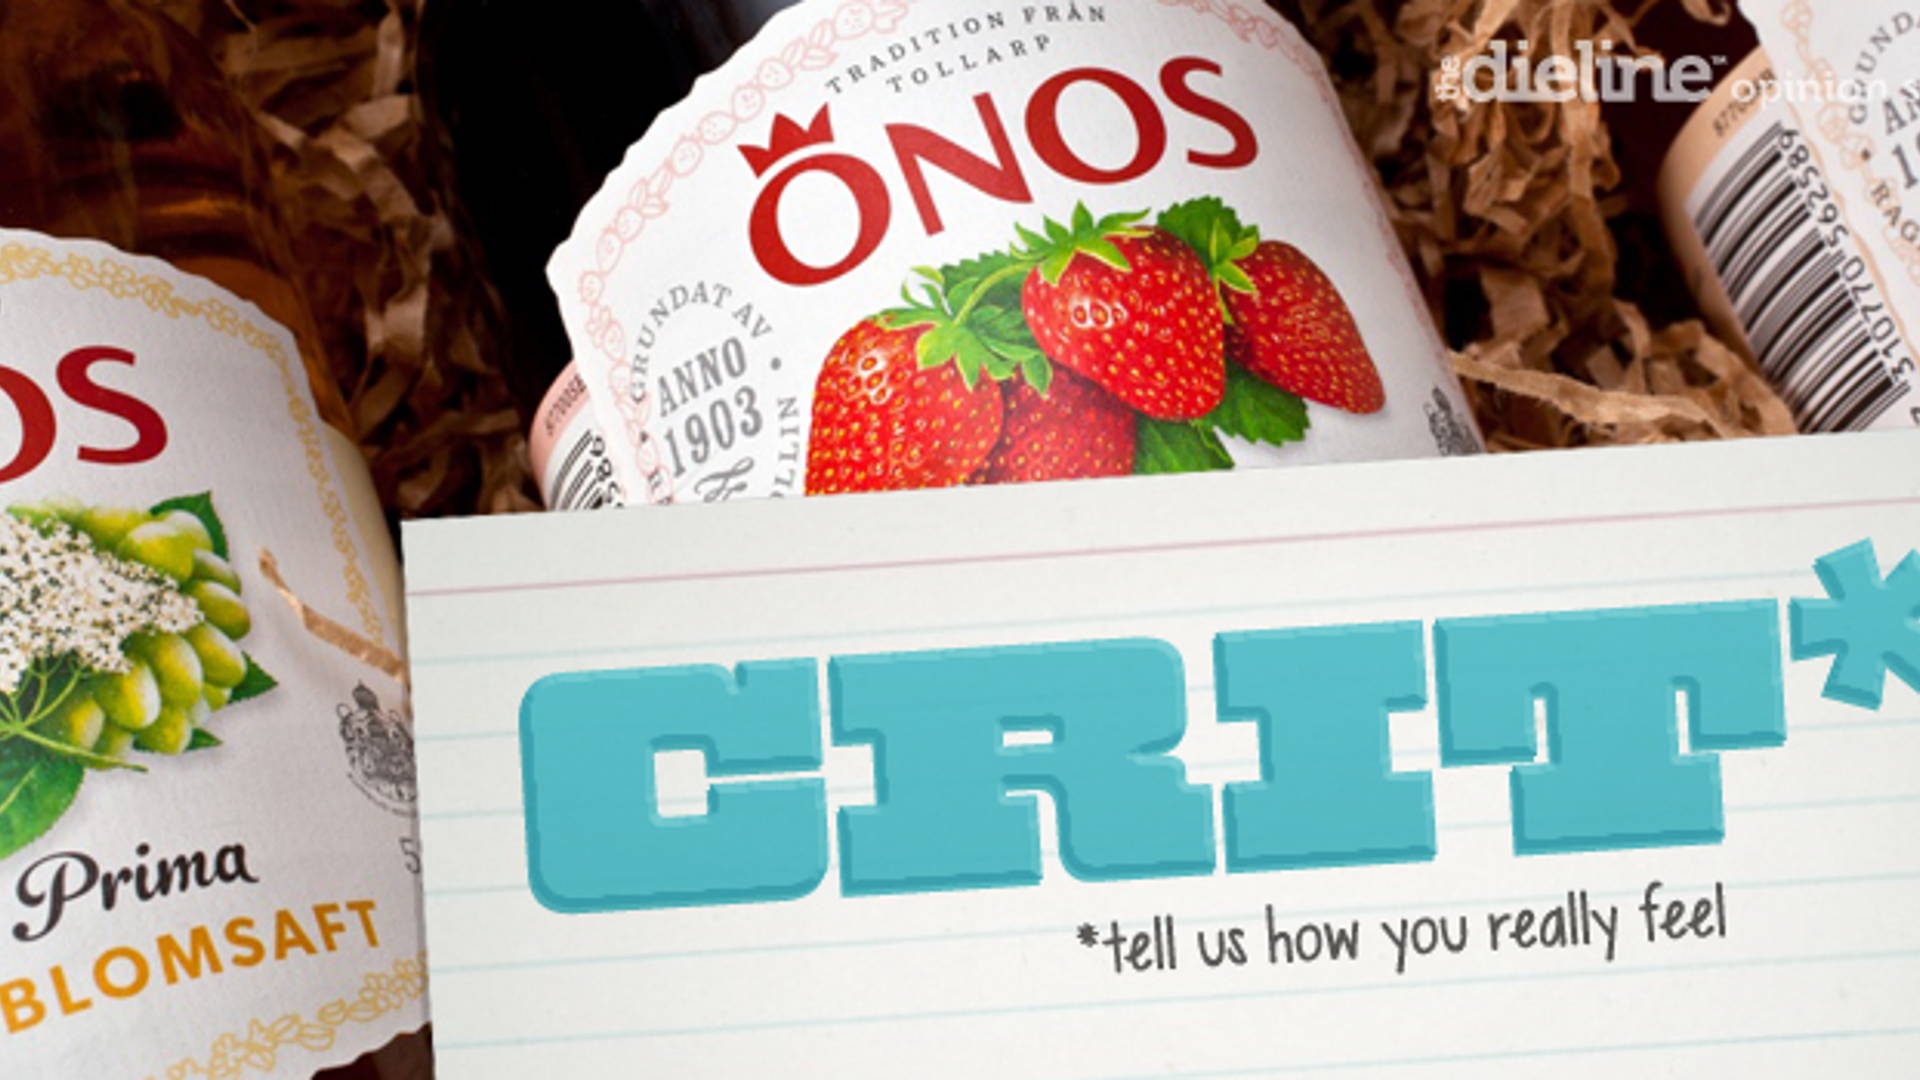 Featured image for Crit* Önos